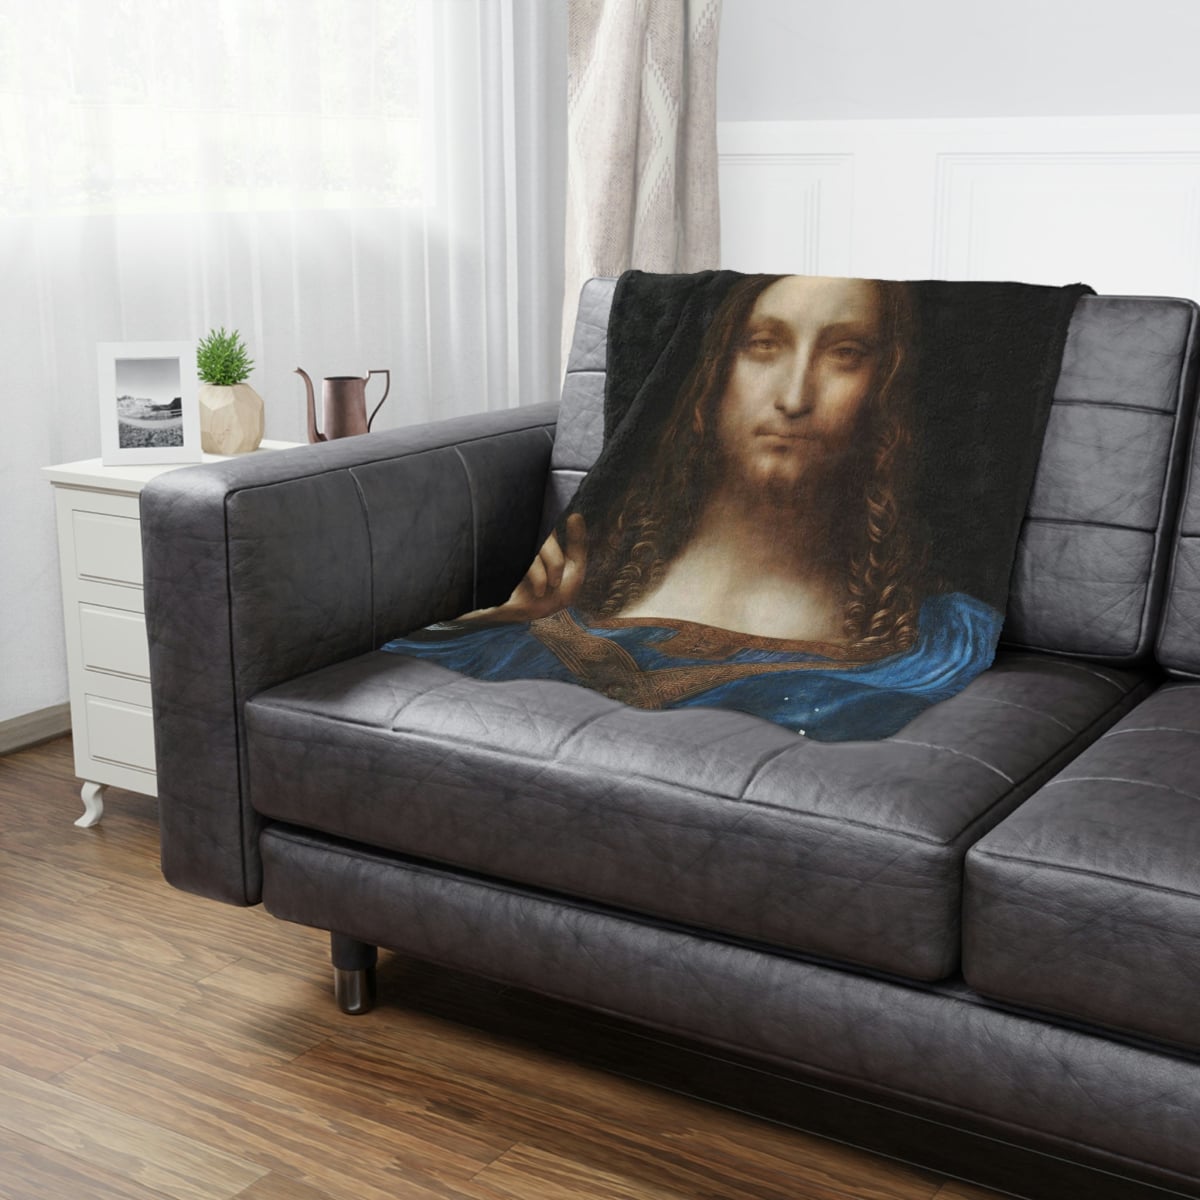 Exclusive Limited Edition Home Decor Blanket